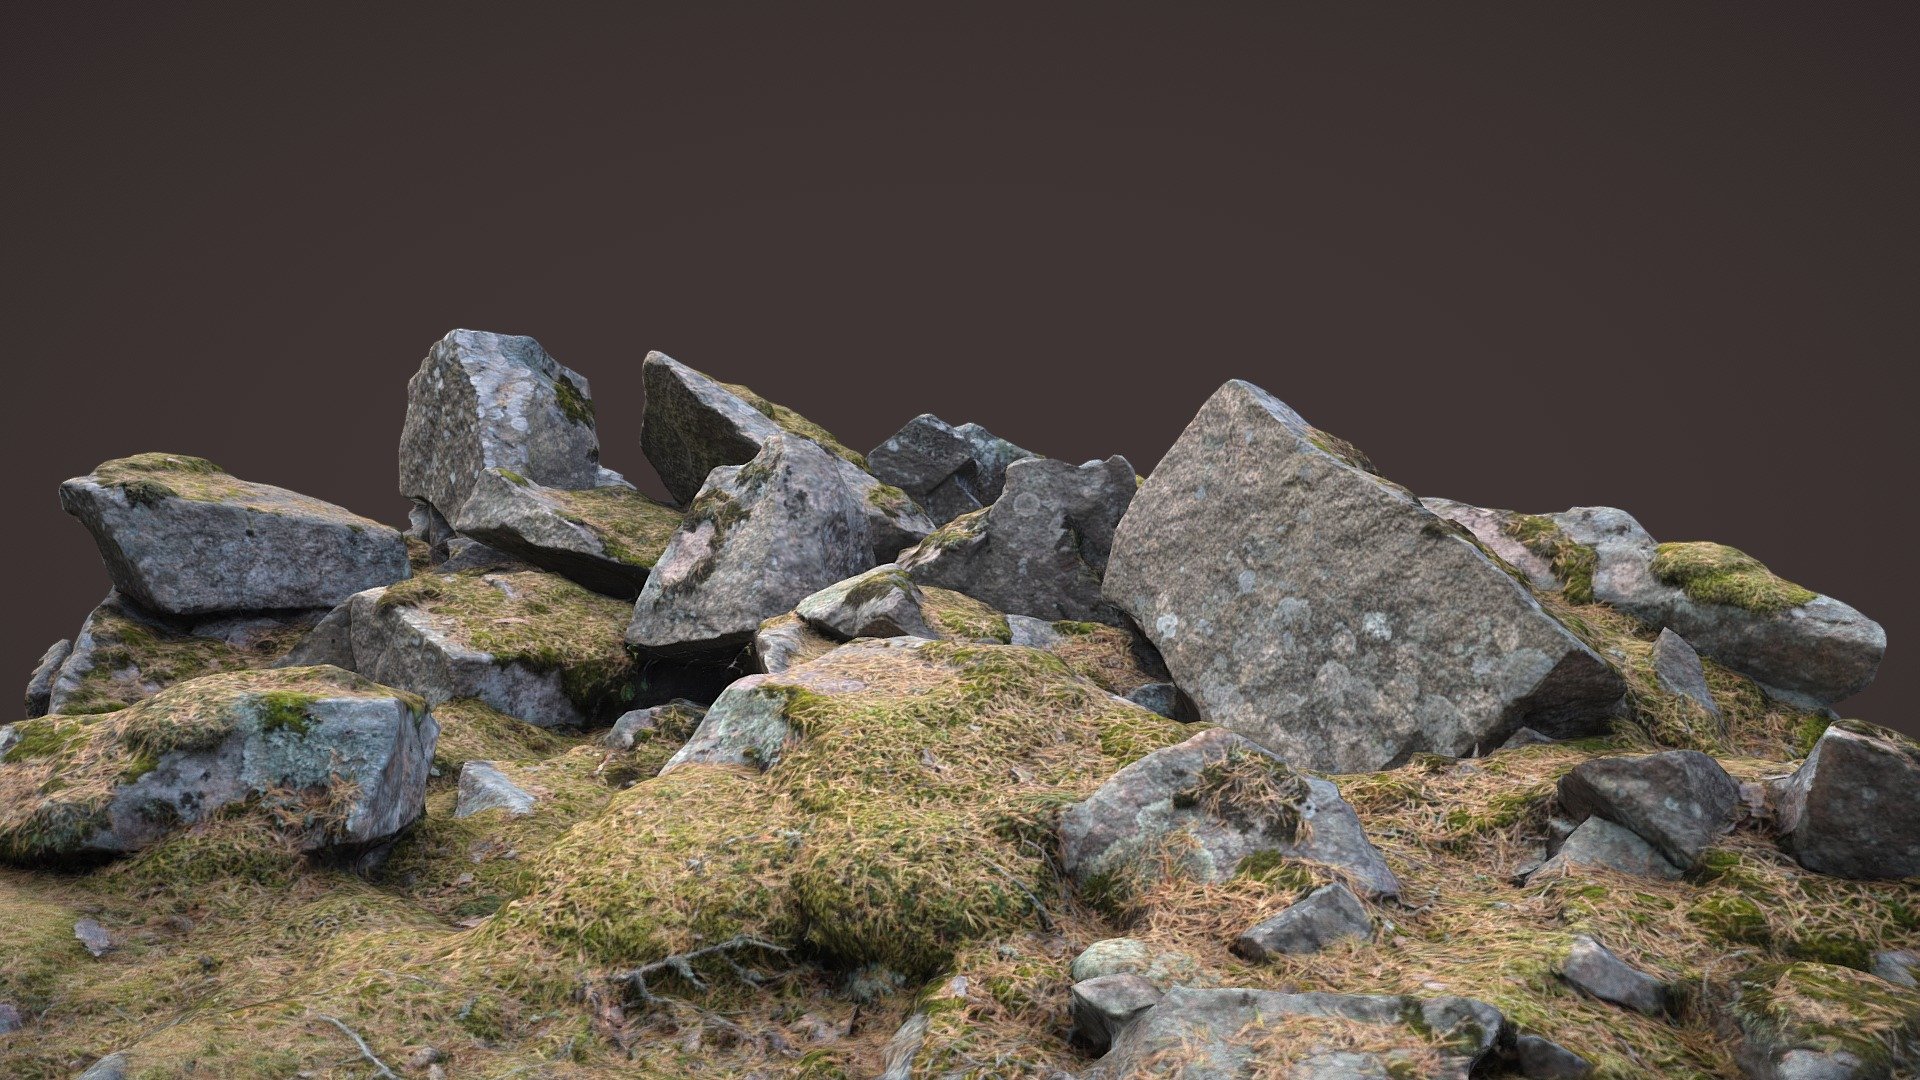 A rocky spot in a Finnish forest.

Photos taken with A7Riv + 20mm Sony.

Processed with Metashape + Blender + Instant meshes - Moss covered rock pile - Download Free 3D model by Lassi Kaukonen (@thesidekick) 3d model